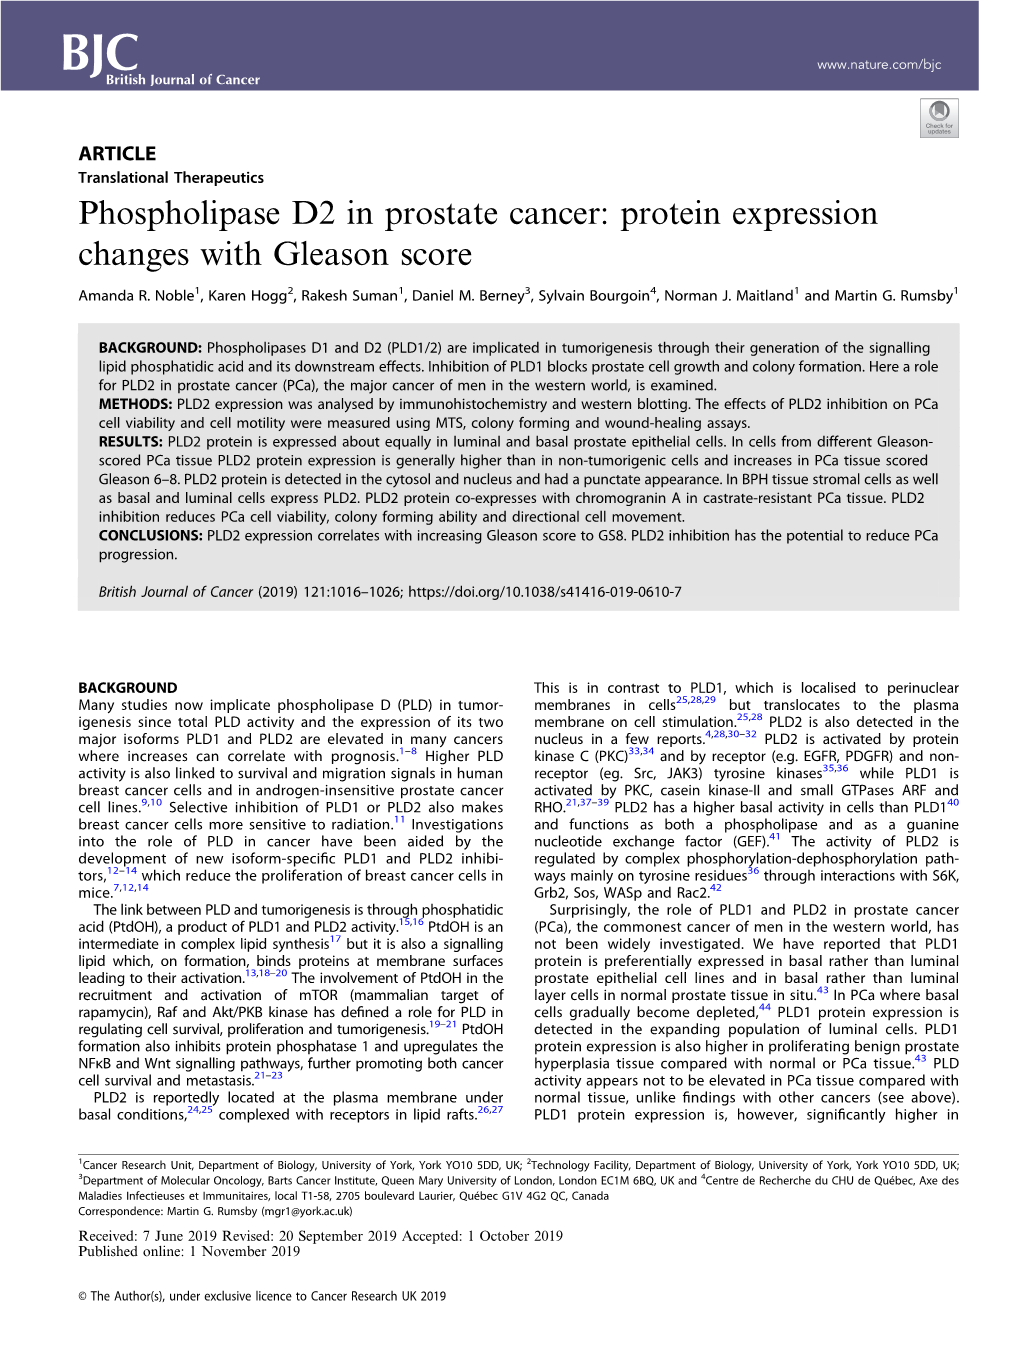 Phospholipase D2 in Prostate Cancer: Protein Expression Changes with Gleason Score